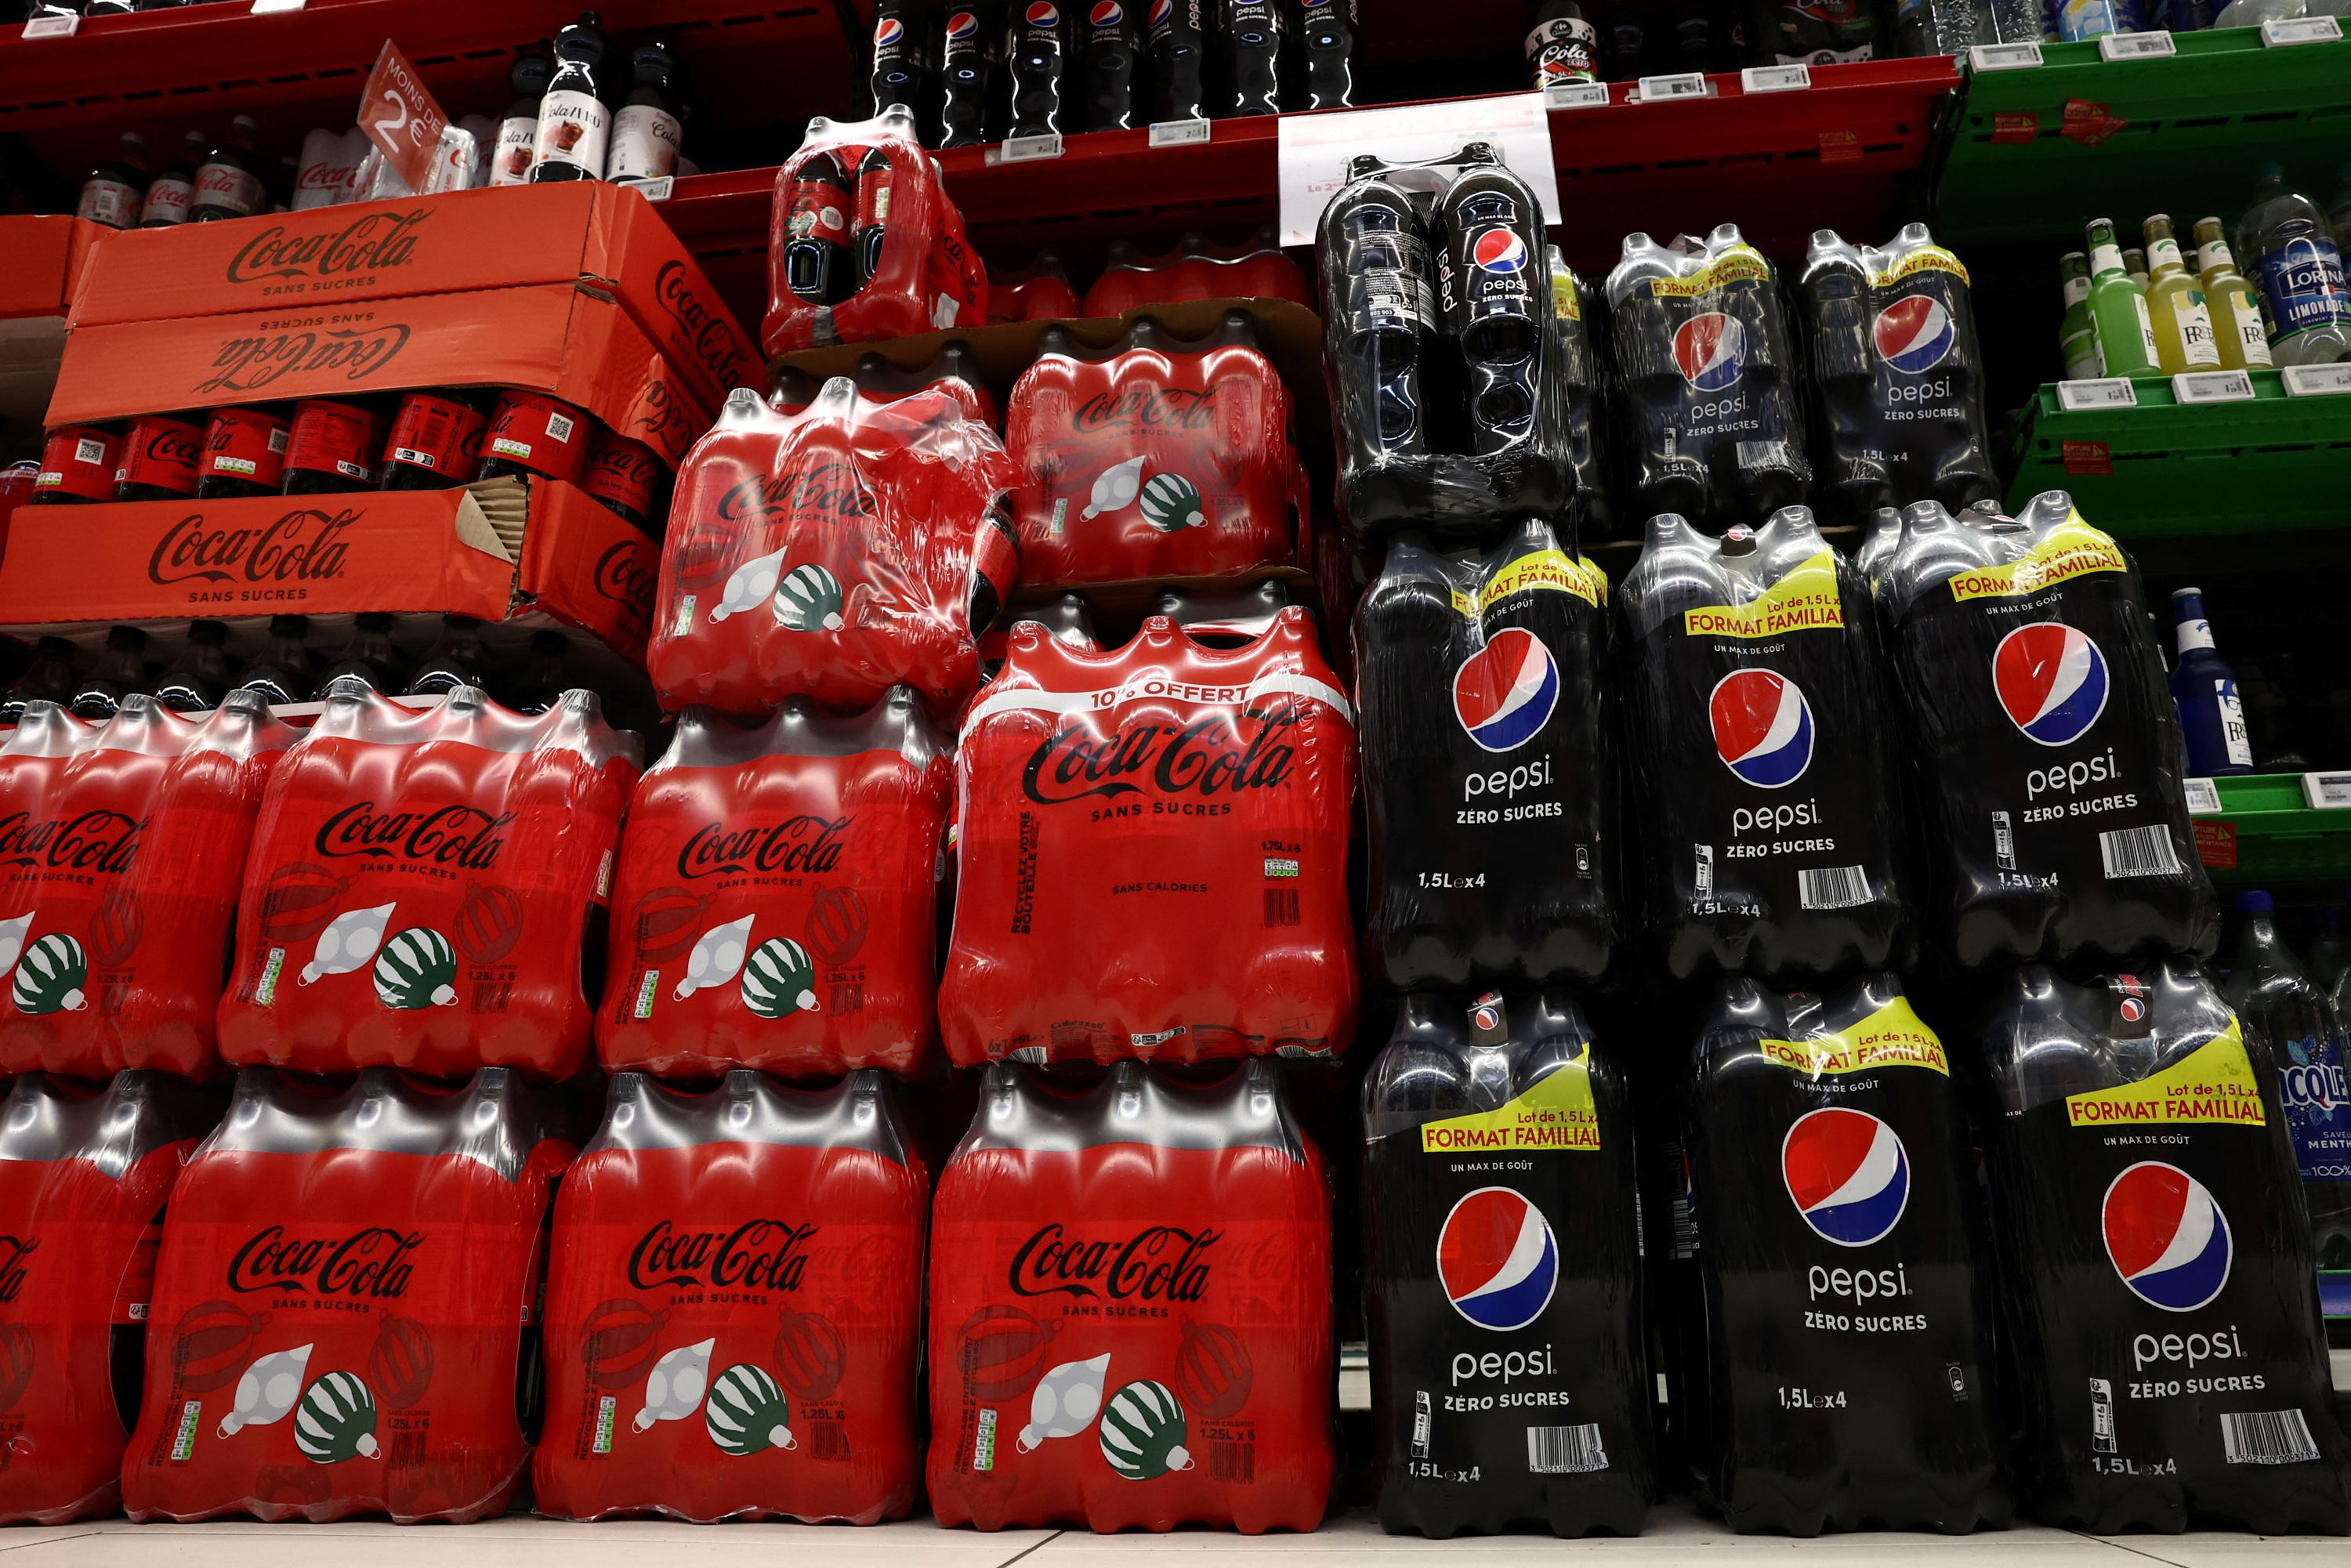 Bercy demanded more than 550 million euros from a French subsidiary of Coca-Cola